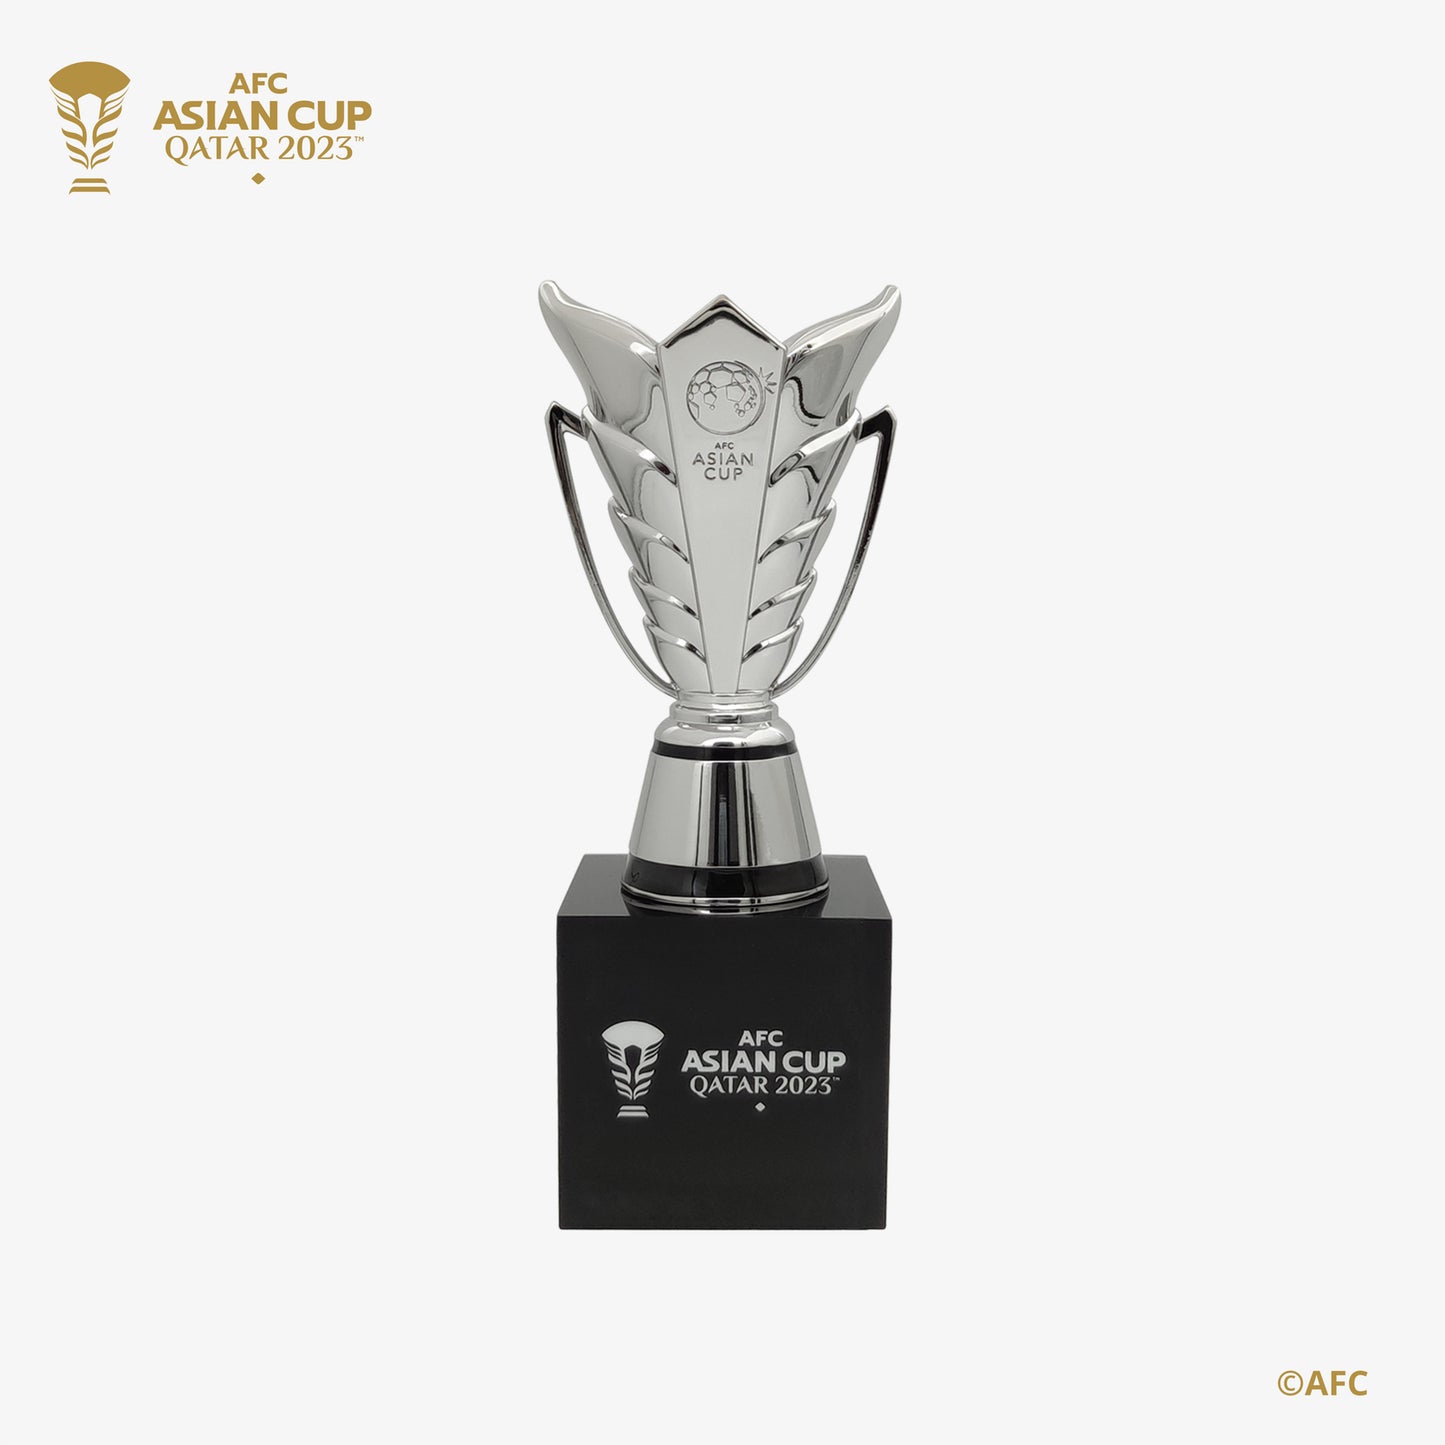 100mm Trophy Replica with Pedestal